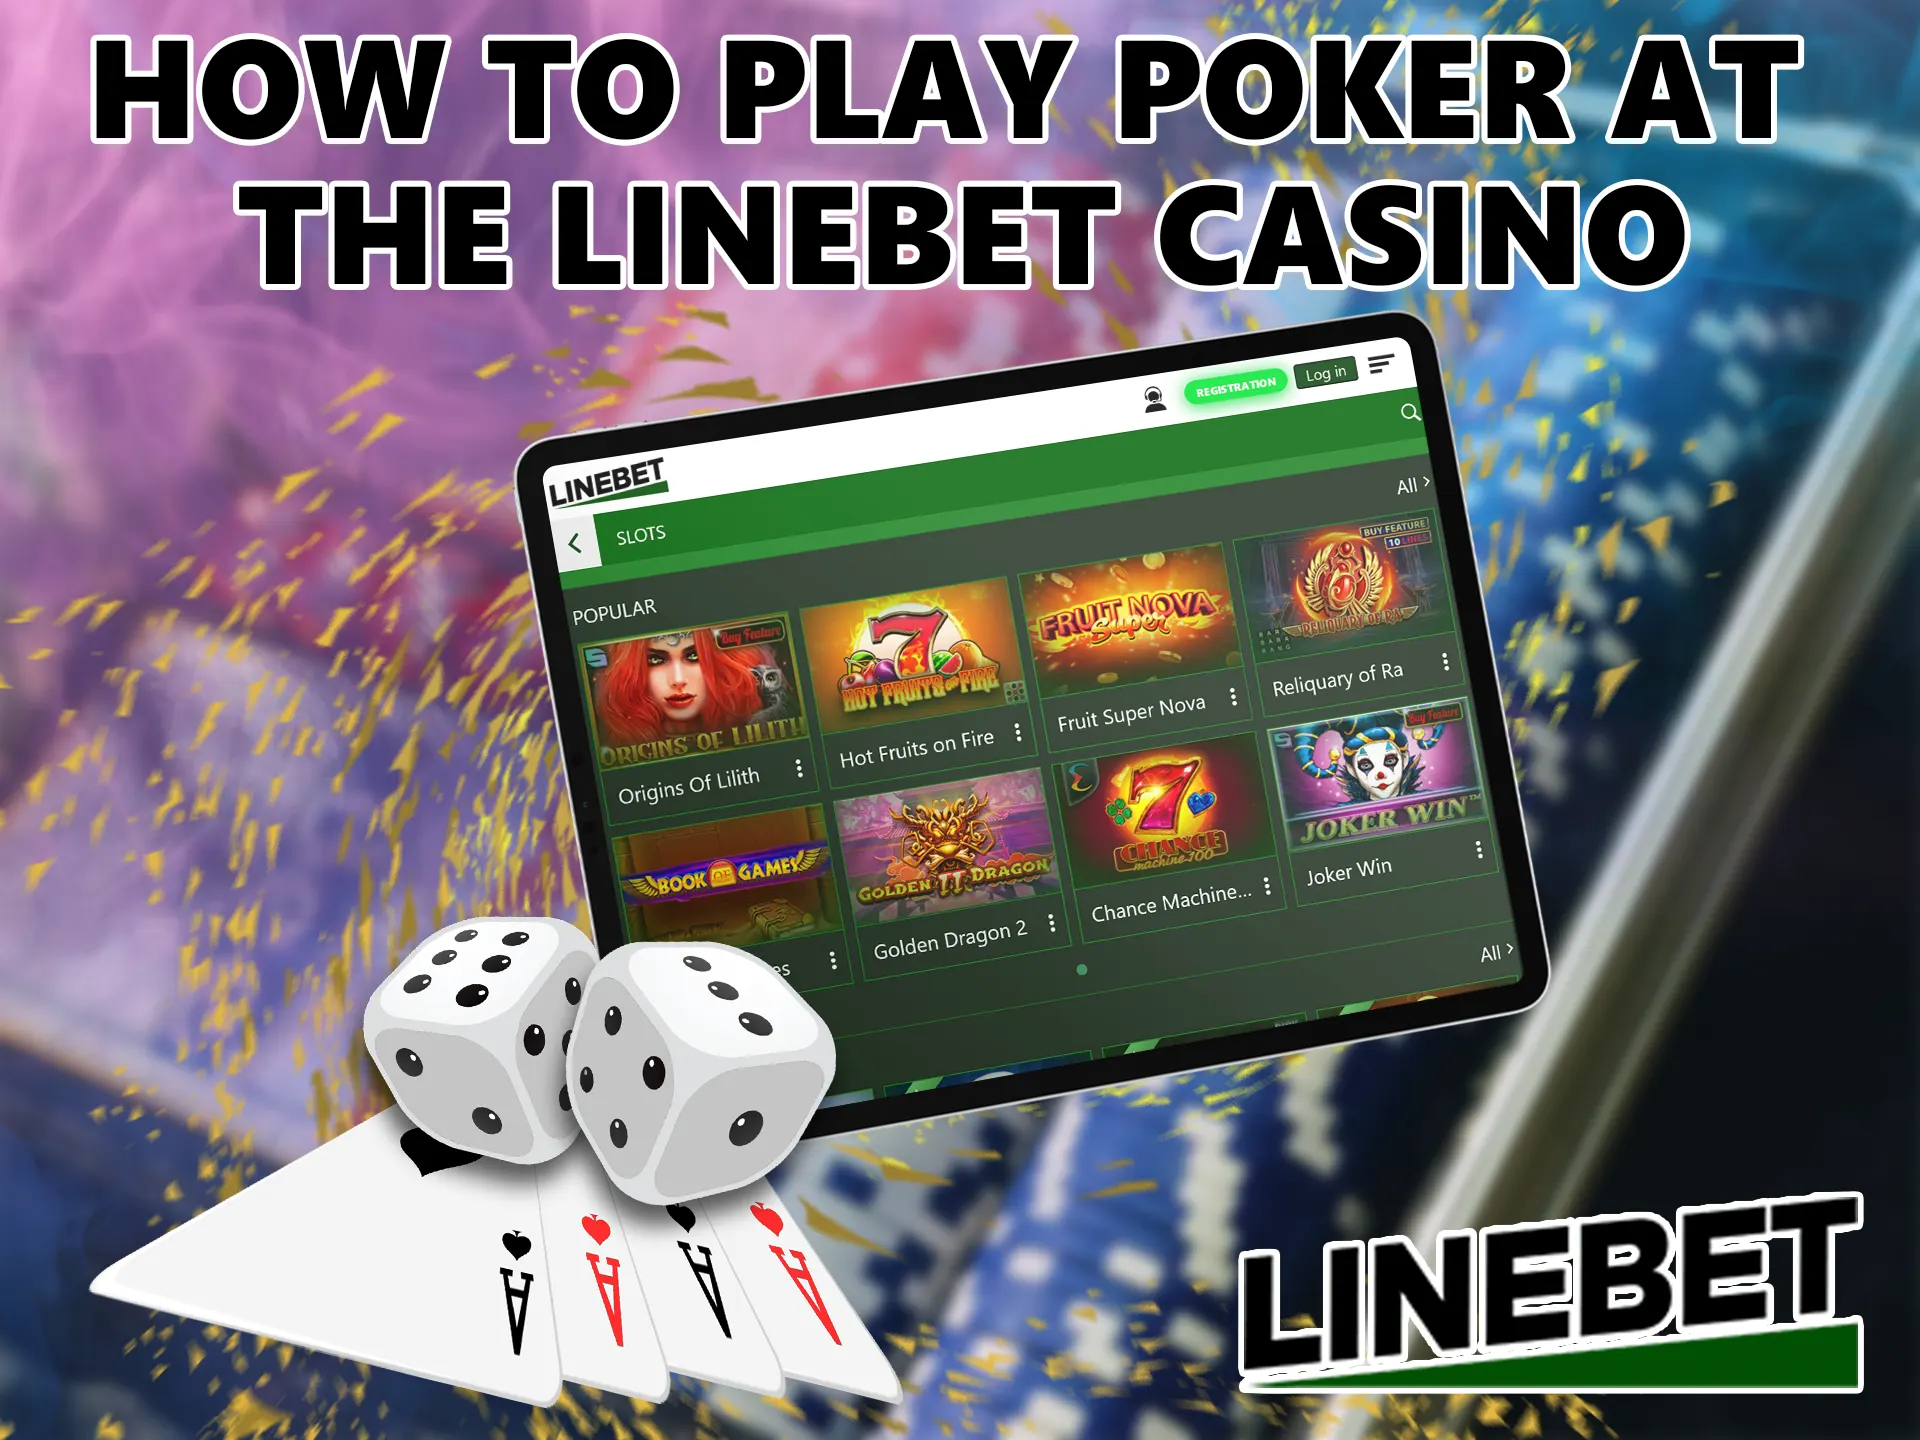 If you don't know what it's like to play at Linebet Casino, we have compiled a detailed guide for you.